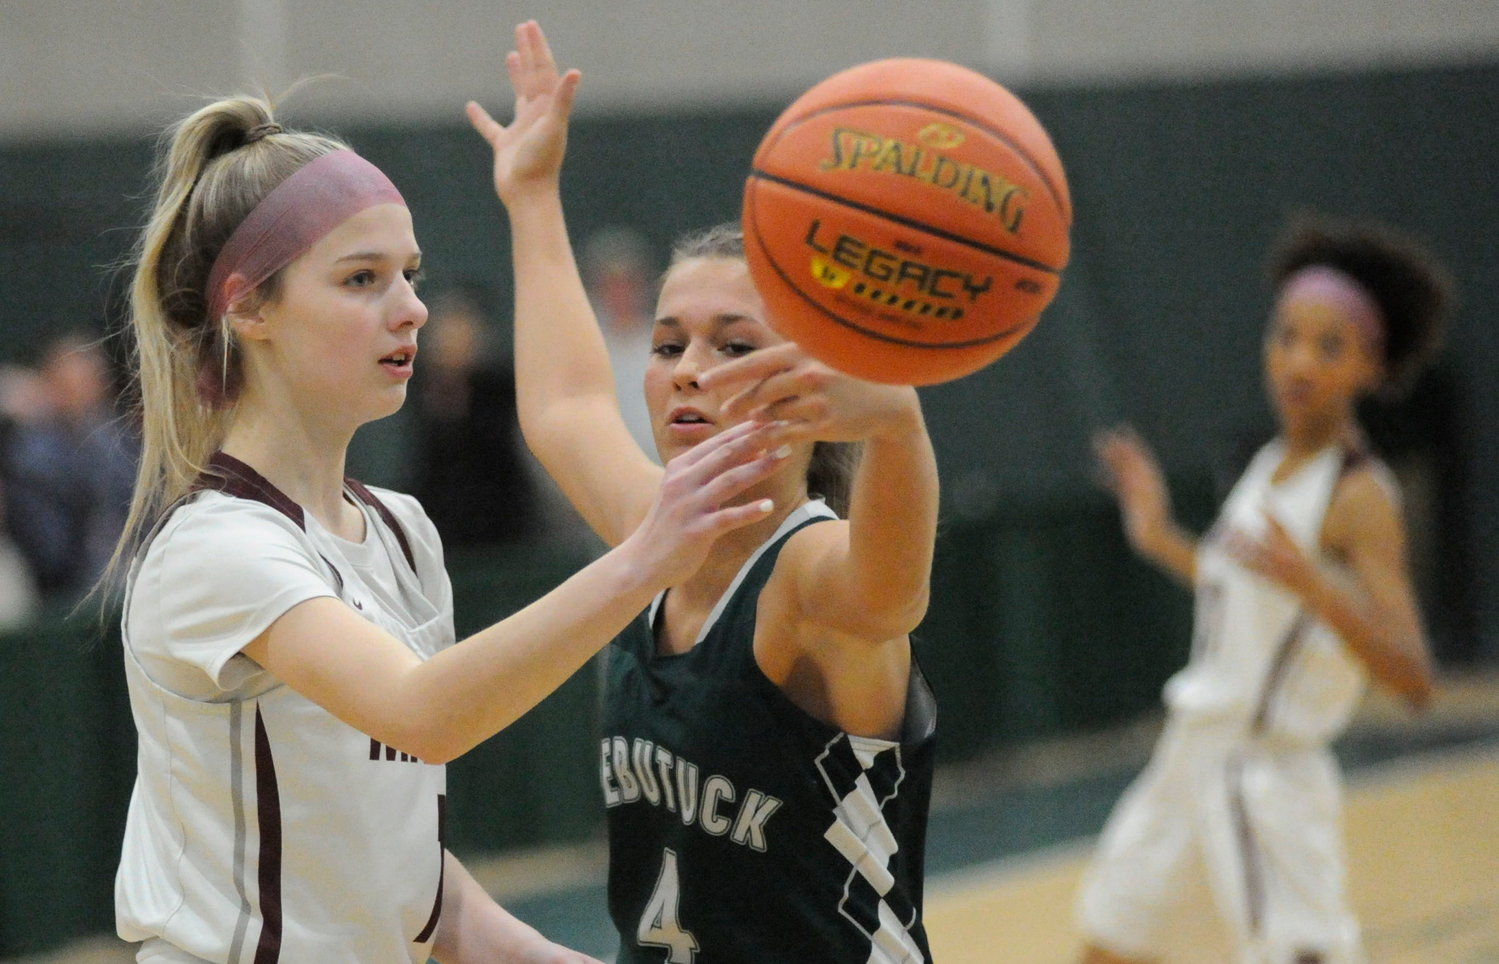 Fingertip control. Manor’s Alyssa Peck and Webutuck’s Joanna Voight, who posted 12 points.